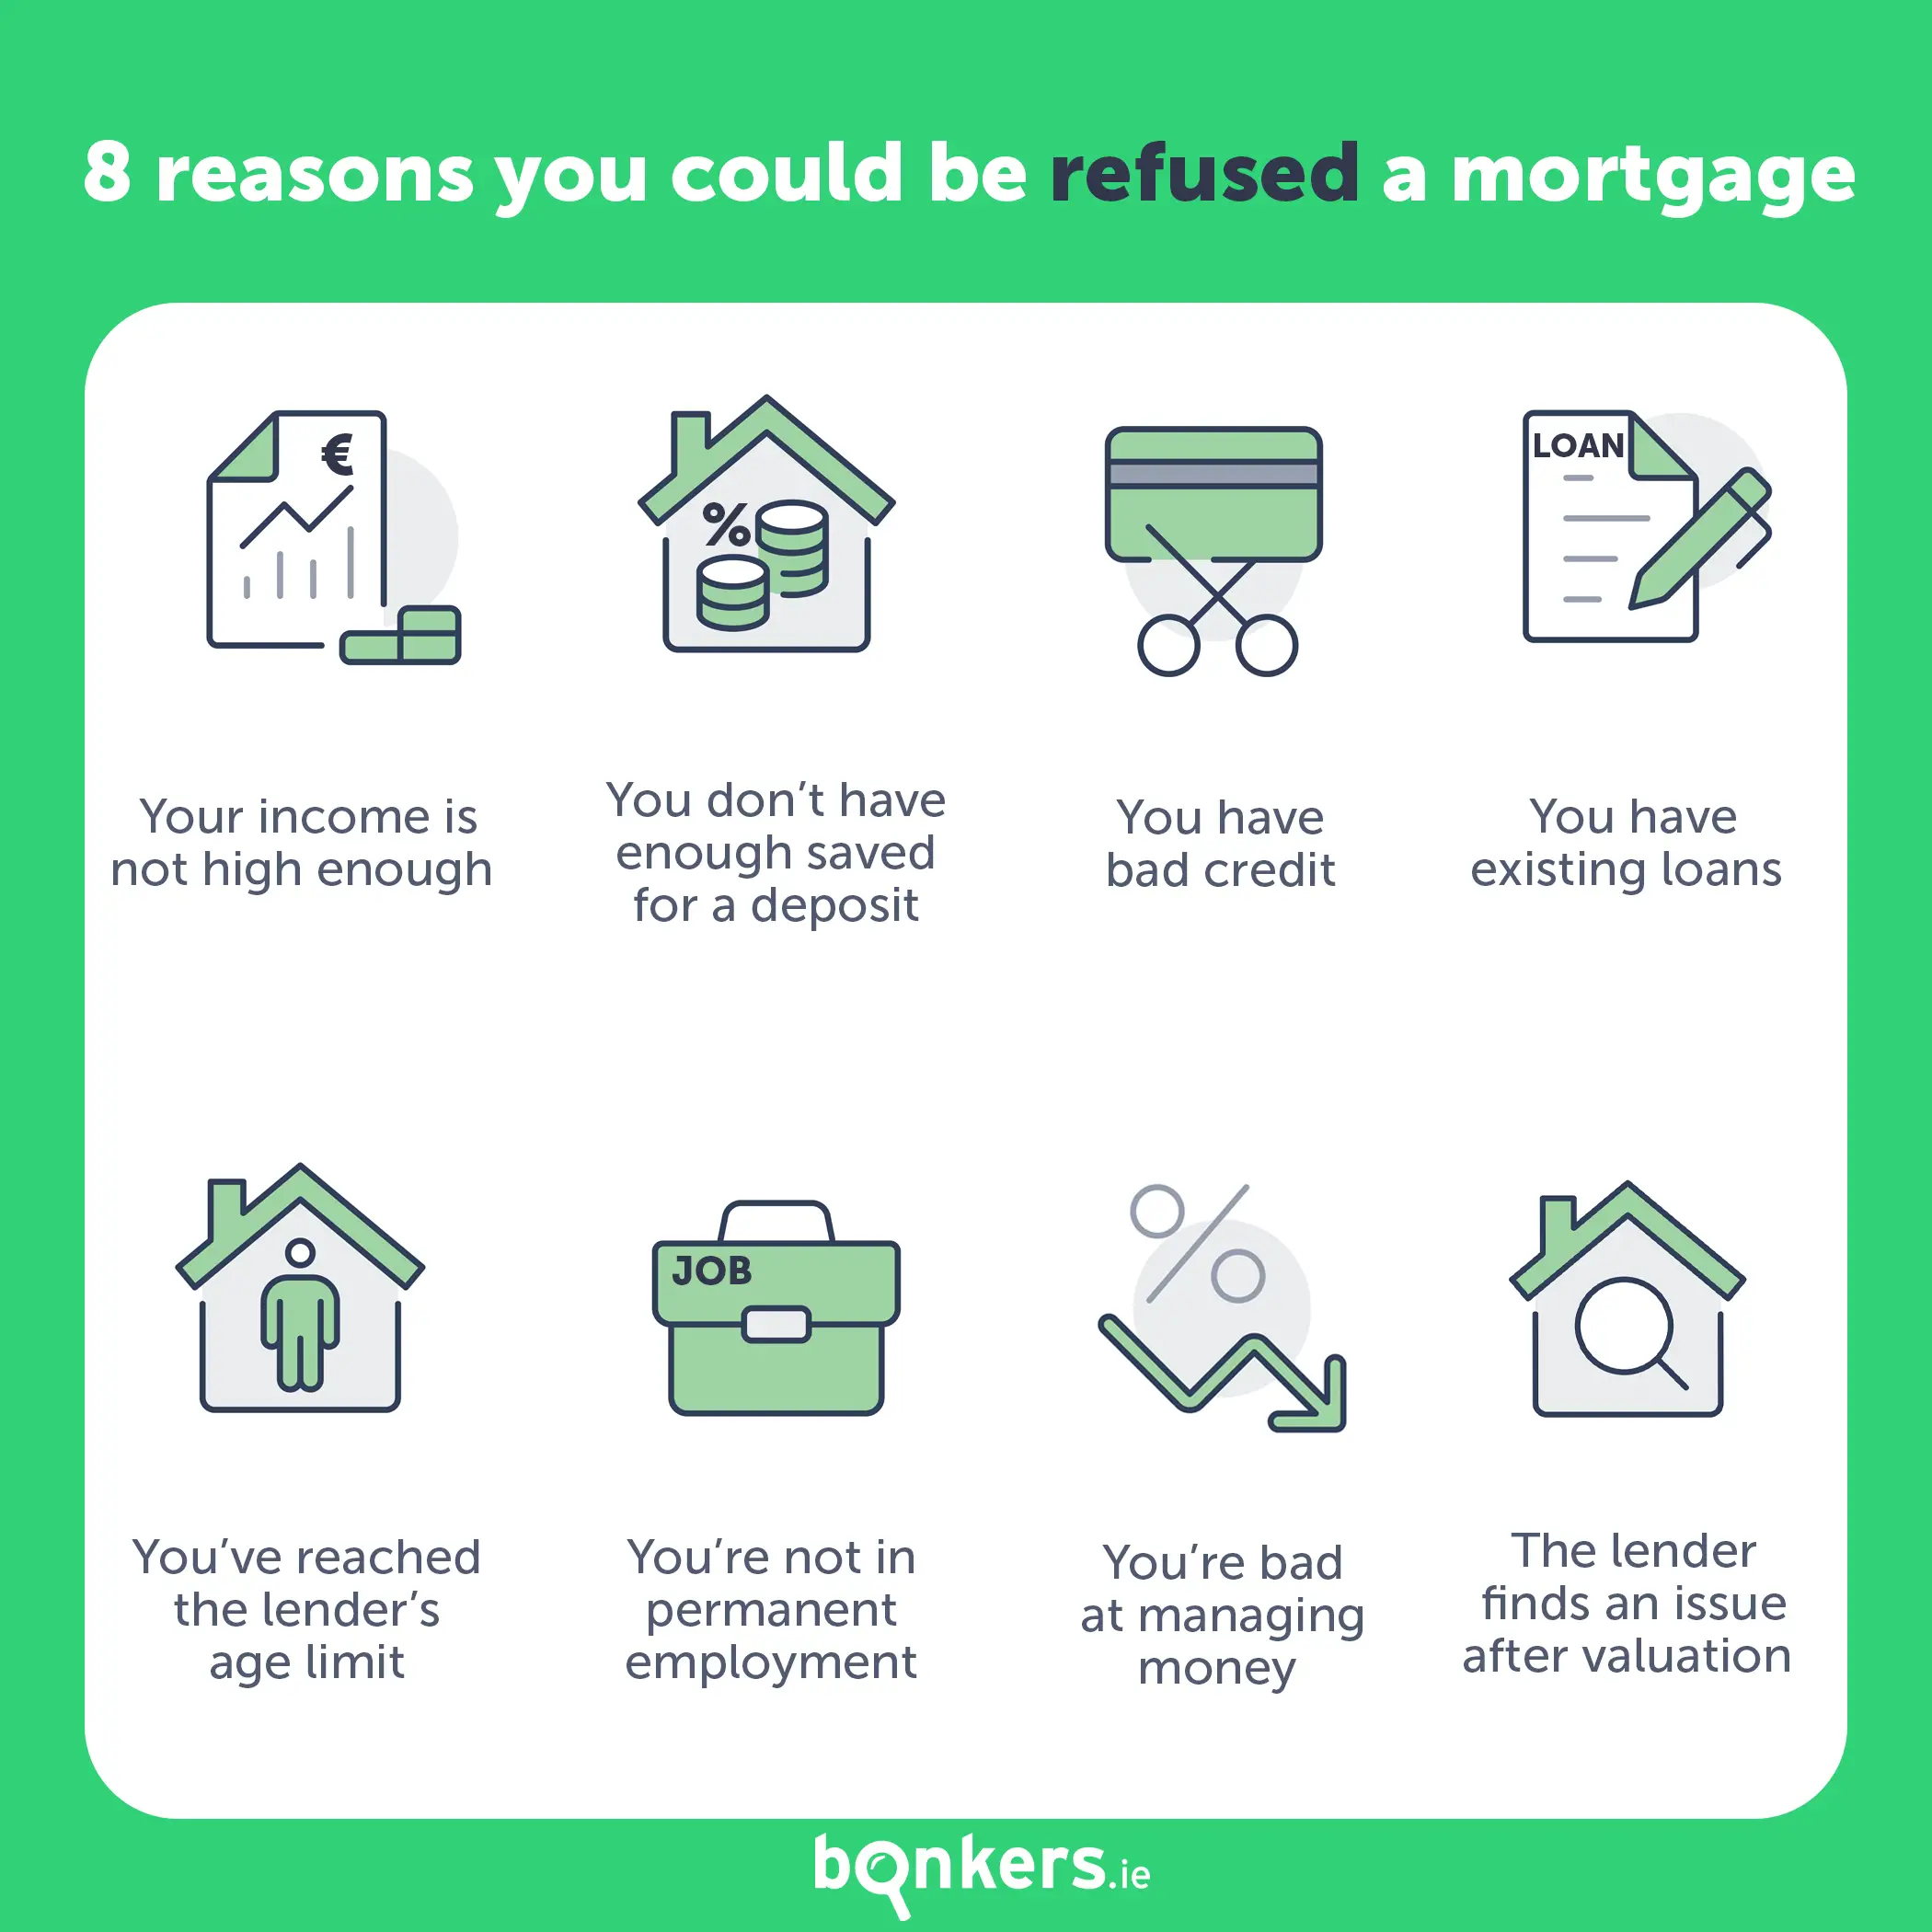 8 reasons why you could be refused a mortgage